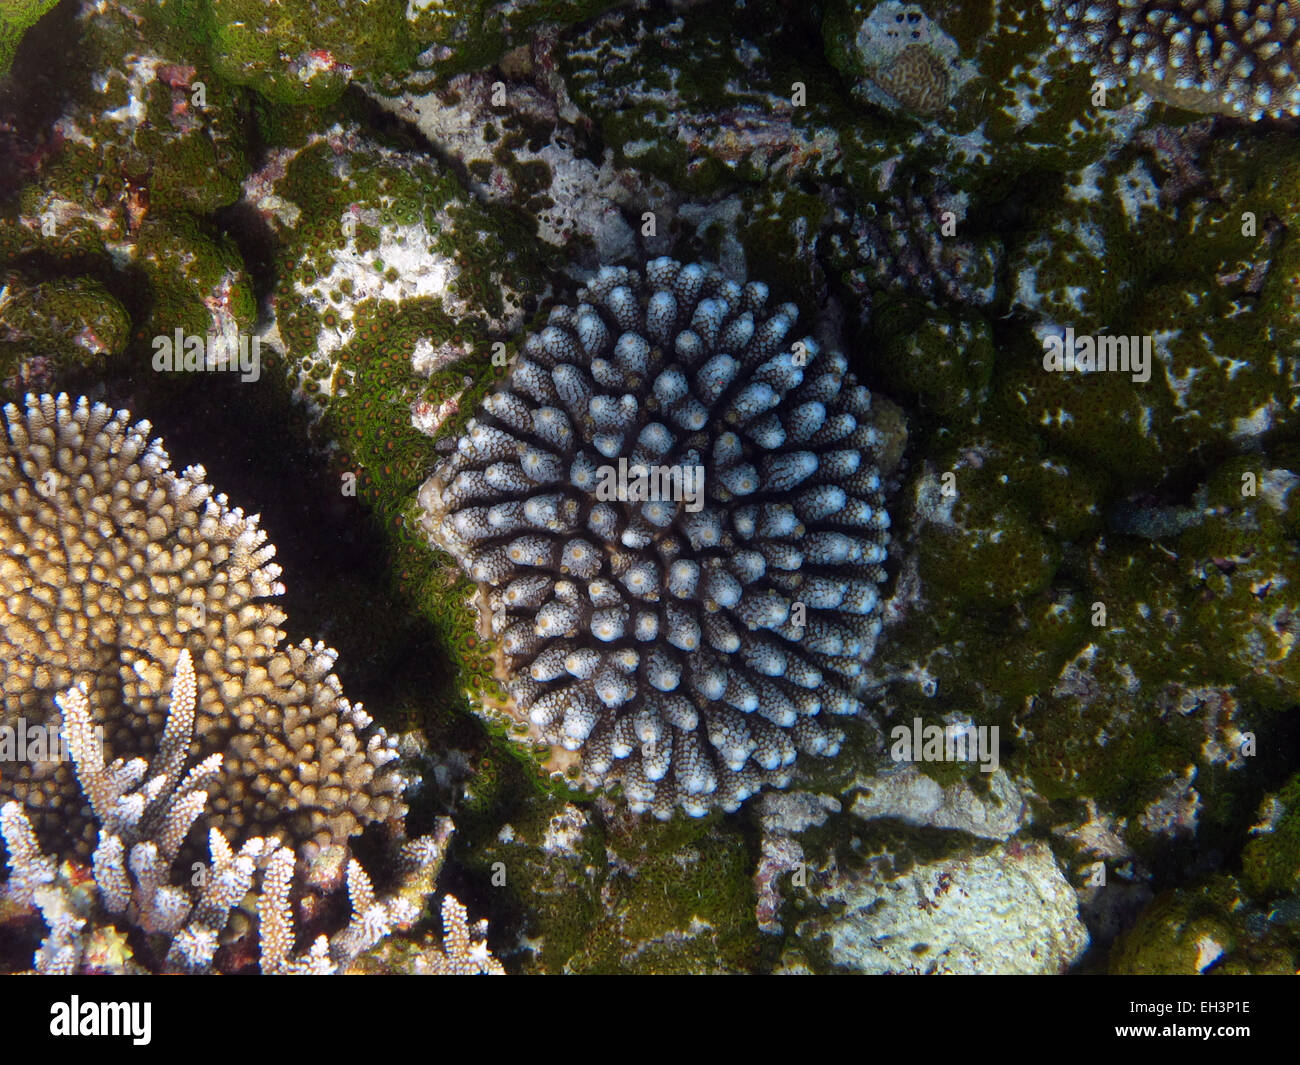 Porites coral on coral reef in the Maldives Stock Photo